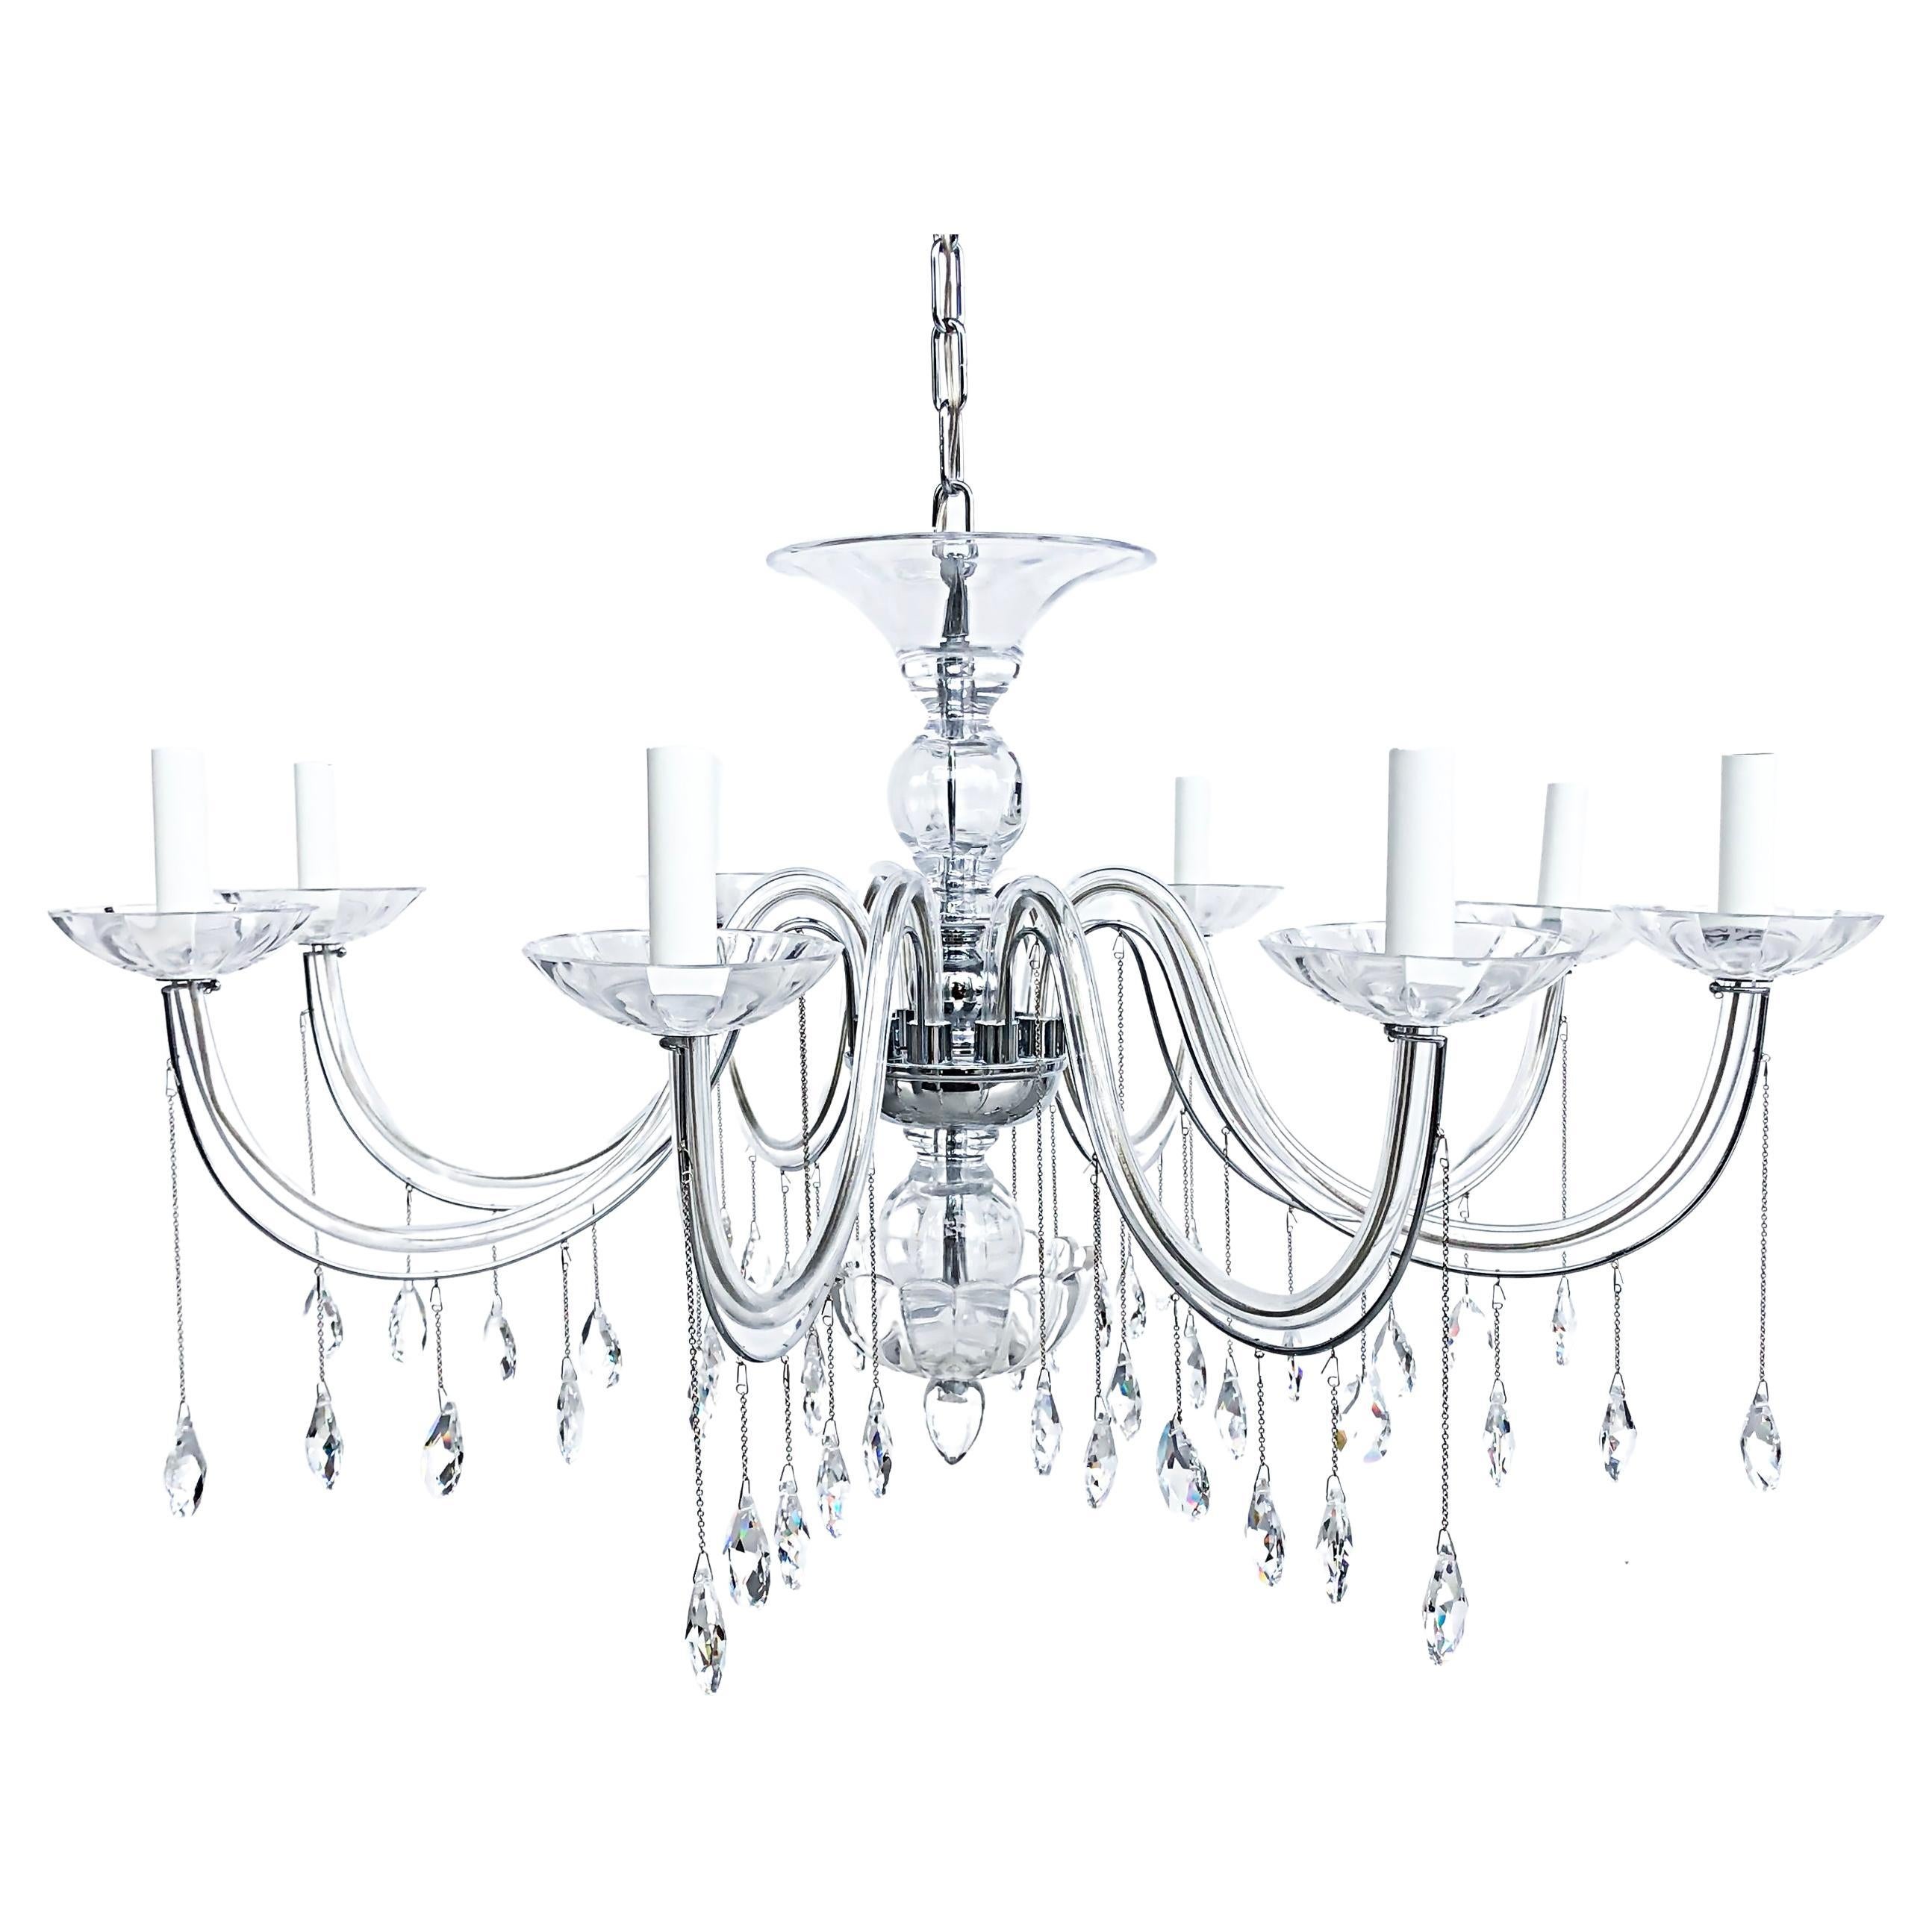 8-Arm Chandelier with Crystal Glass Drops, Chain and Canopy, Wired & Working For Sale